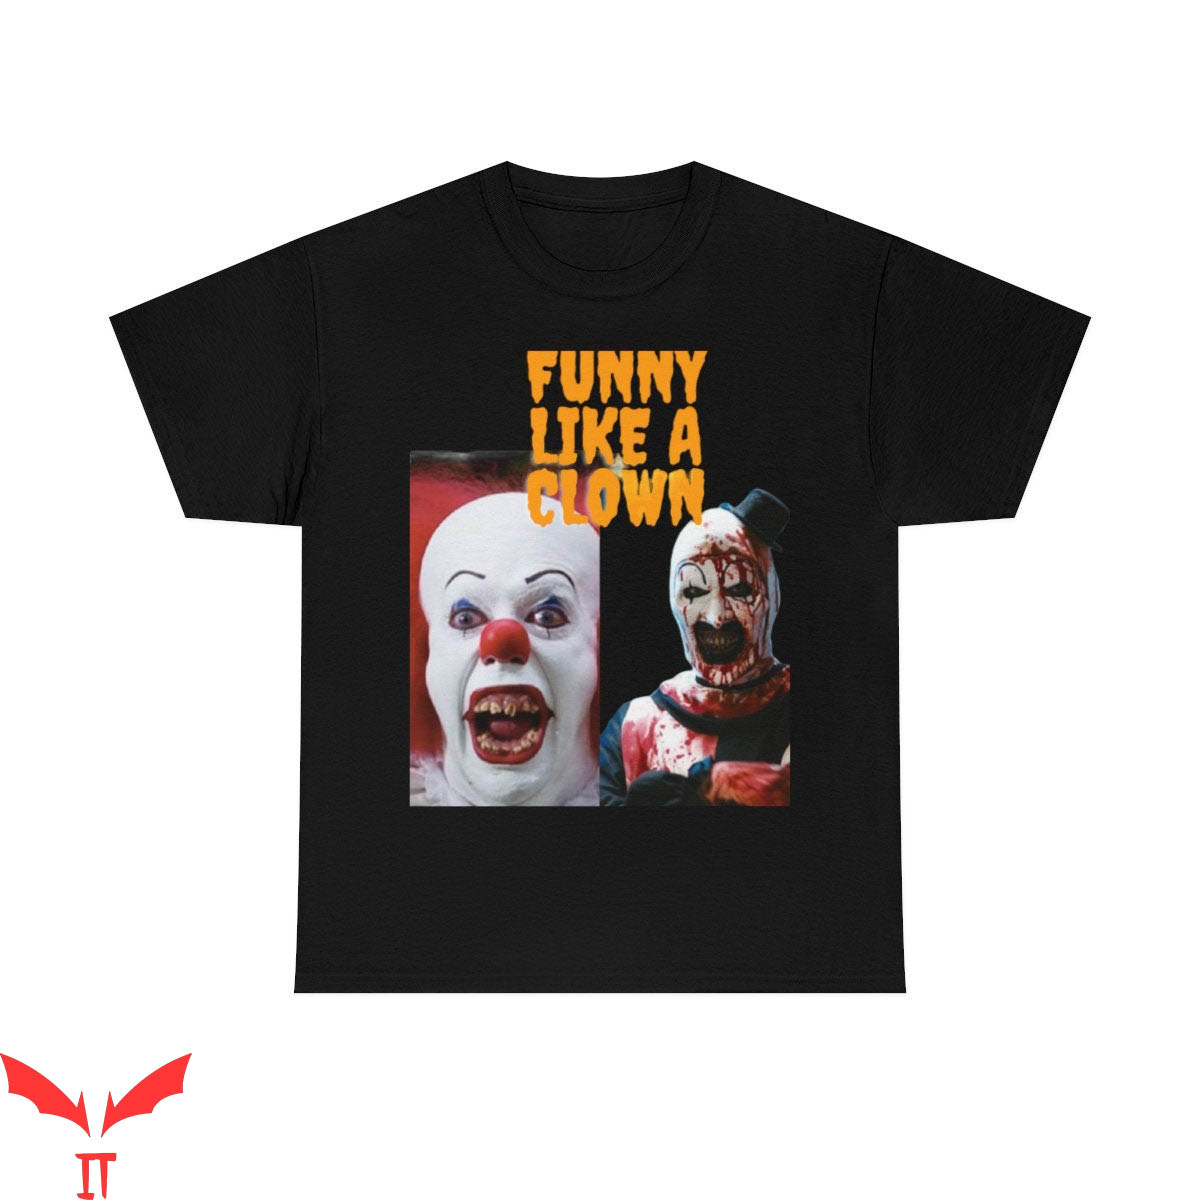 Pennywise Clown T Shirt Art Vs Pennywise Funny Like A Clown